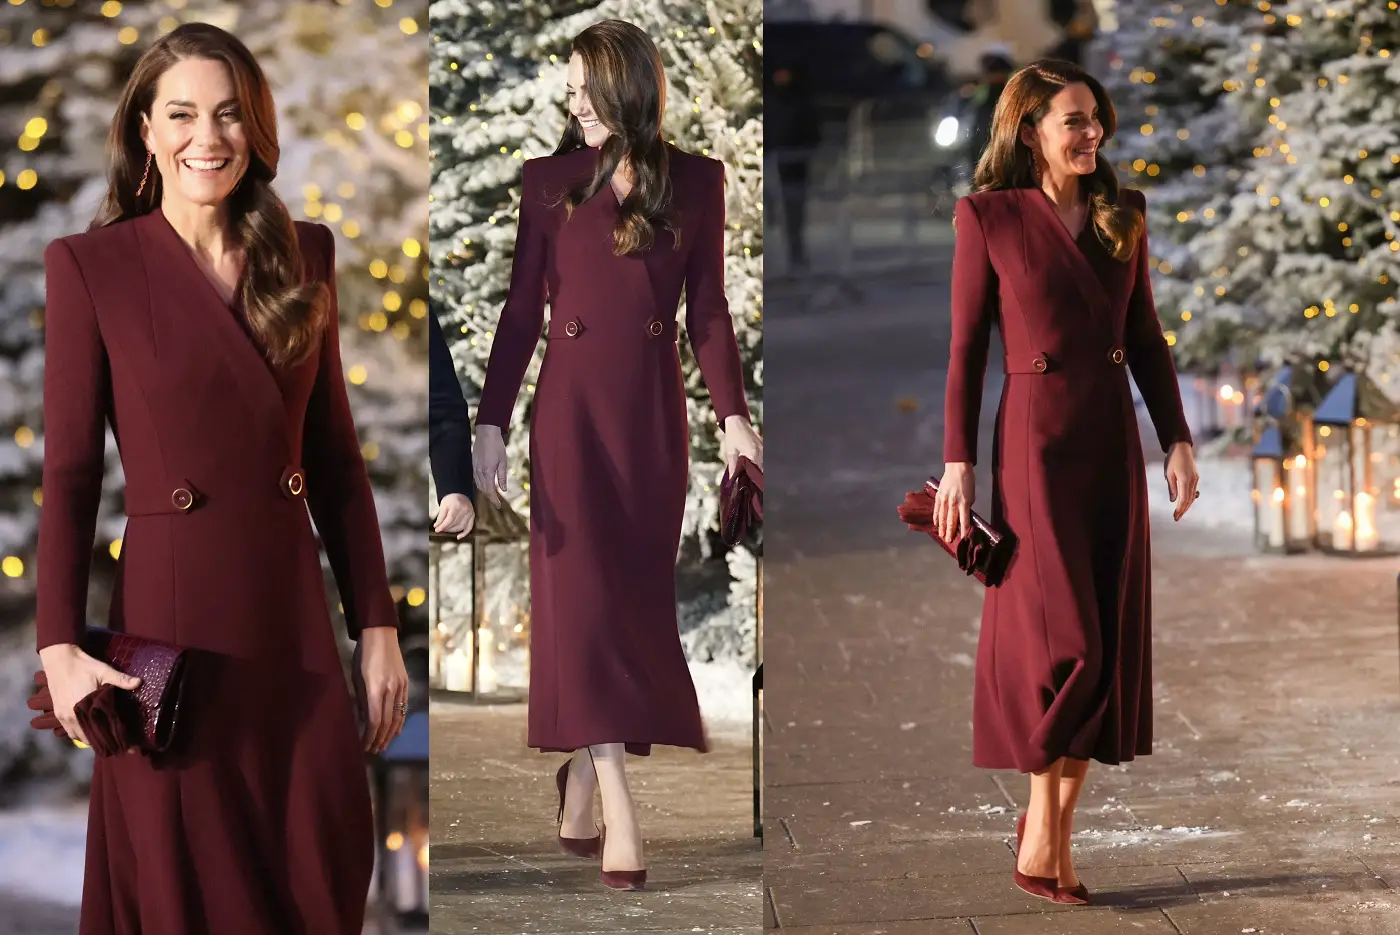 Catherine The Princess of Wales wore Eponine London Chi Chi Burgundy Coat Dress in December 2022 at the Christmas Carol service.